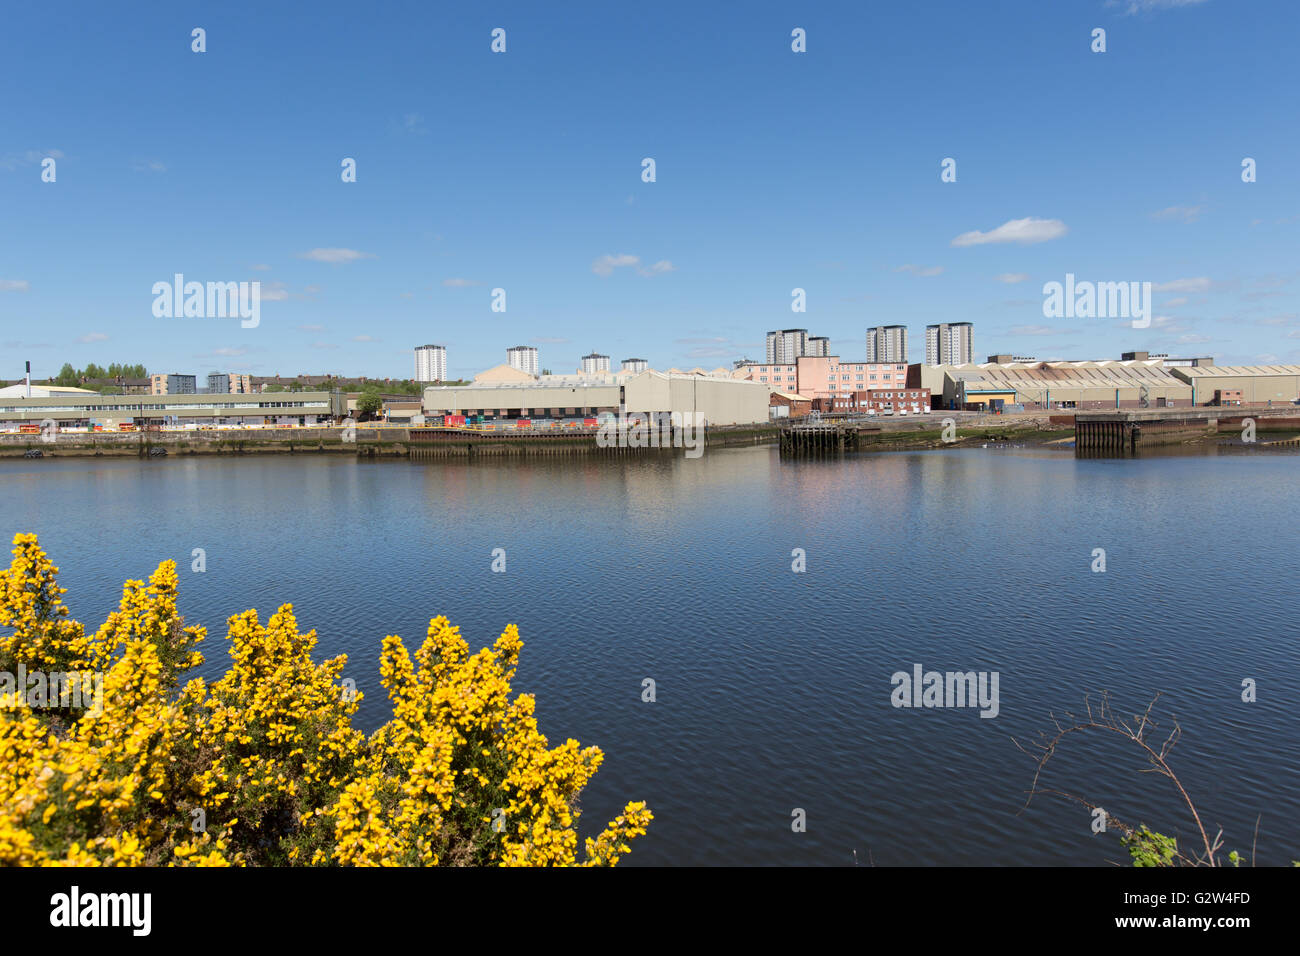 City of Glasgow, Scotland. The River Clyde with former shipbuilding sites, at South Street, in the background. Stock Photo